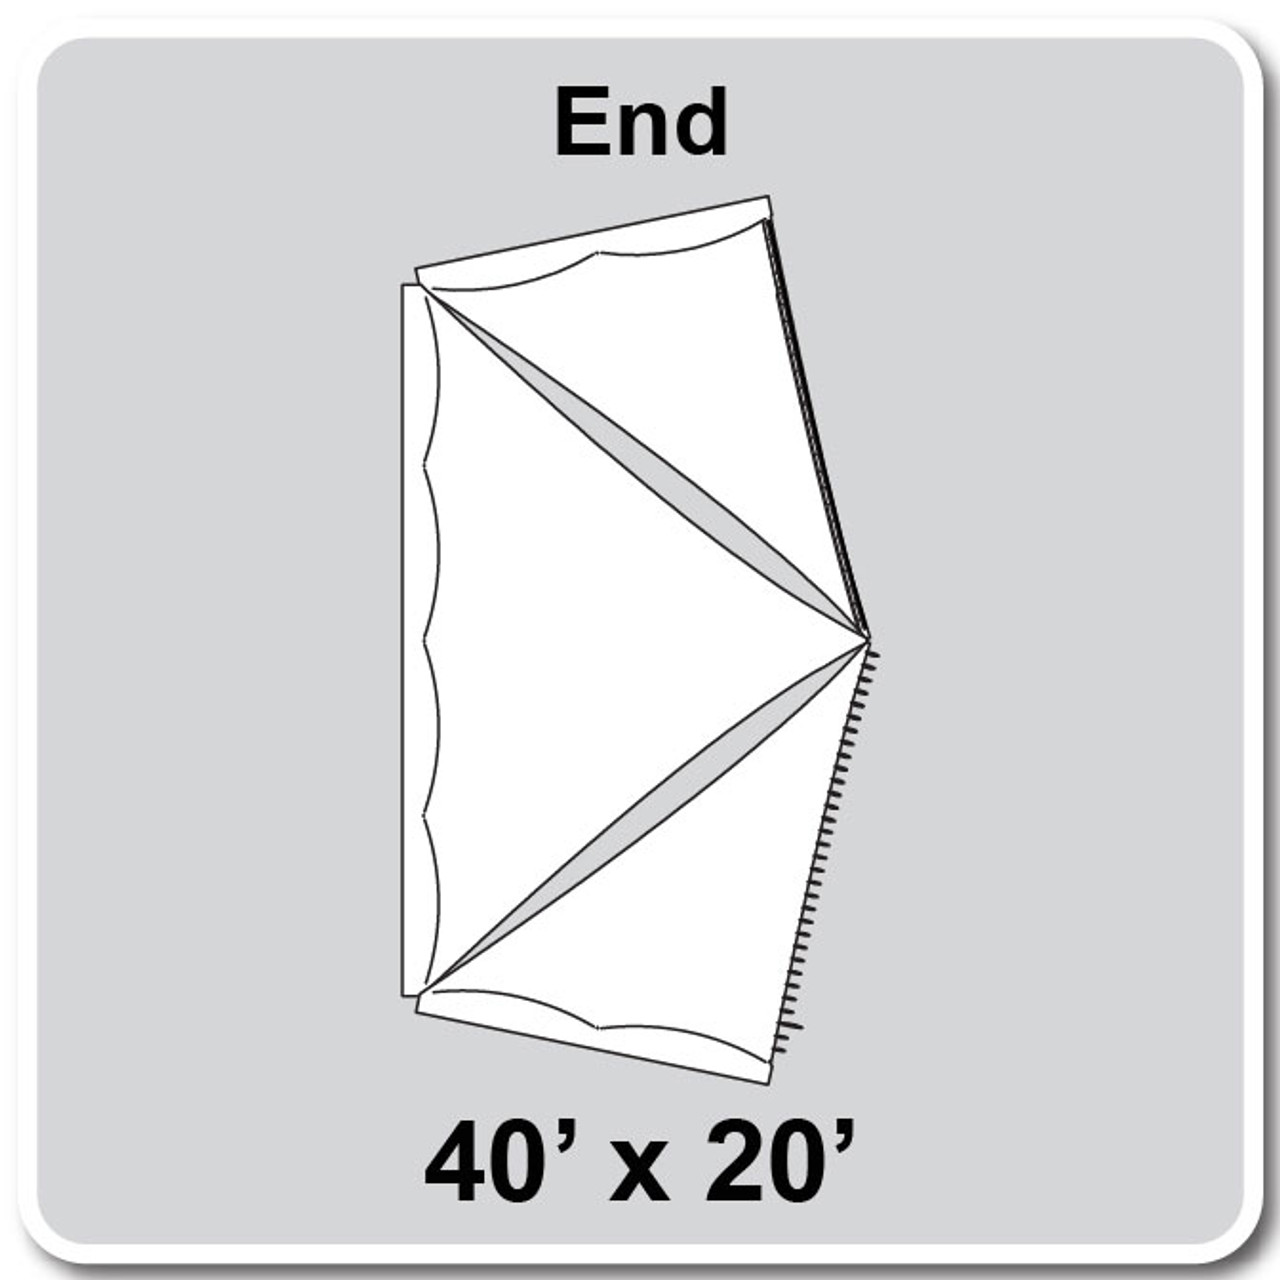 40' x 20' Engineered II (Premiere) High Peak Pole Tent End, 16 oz. Ratchet Top, Solid White